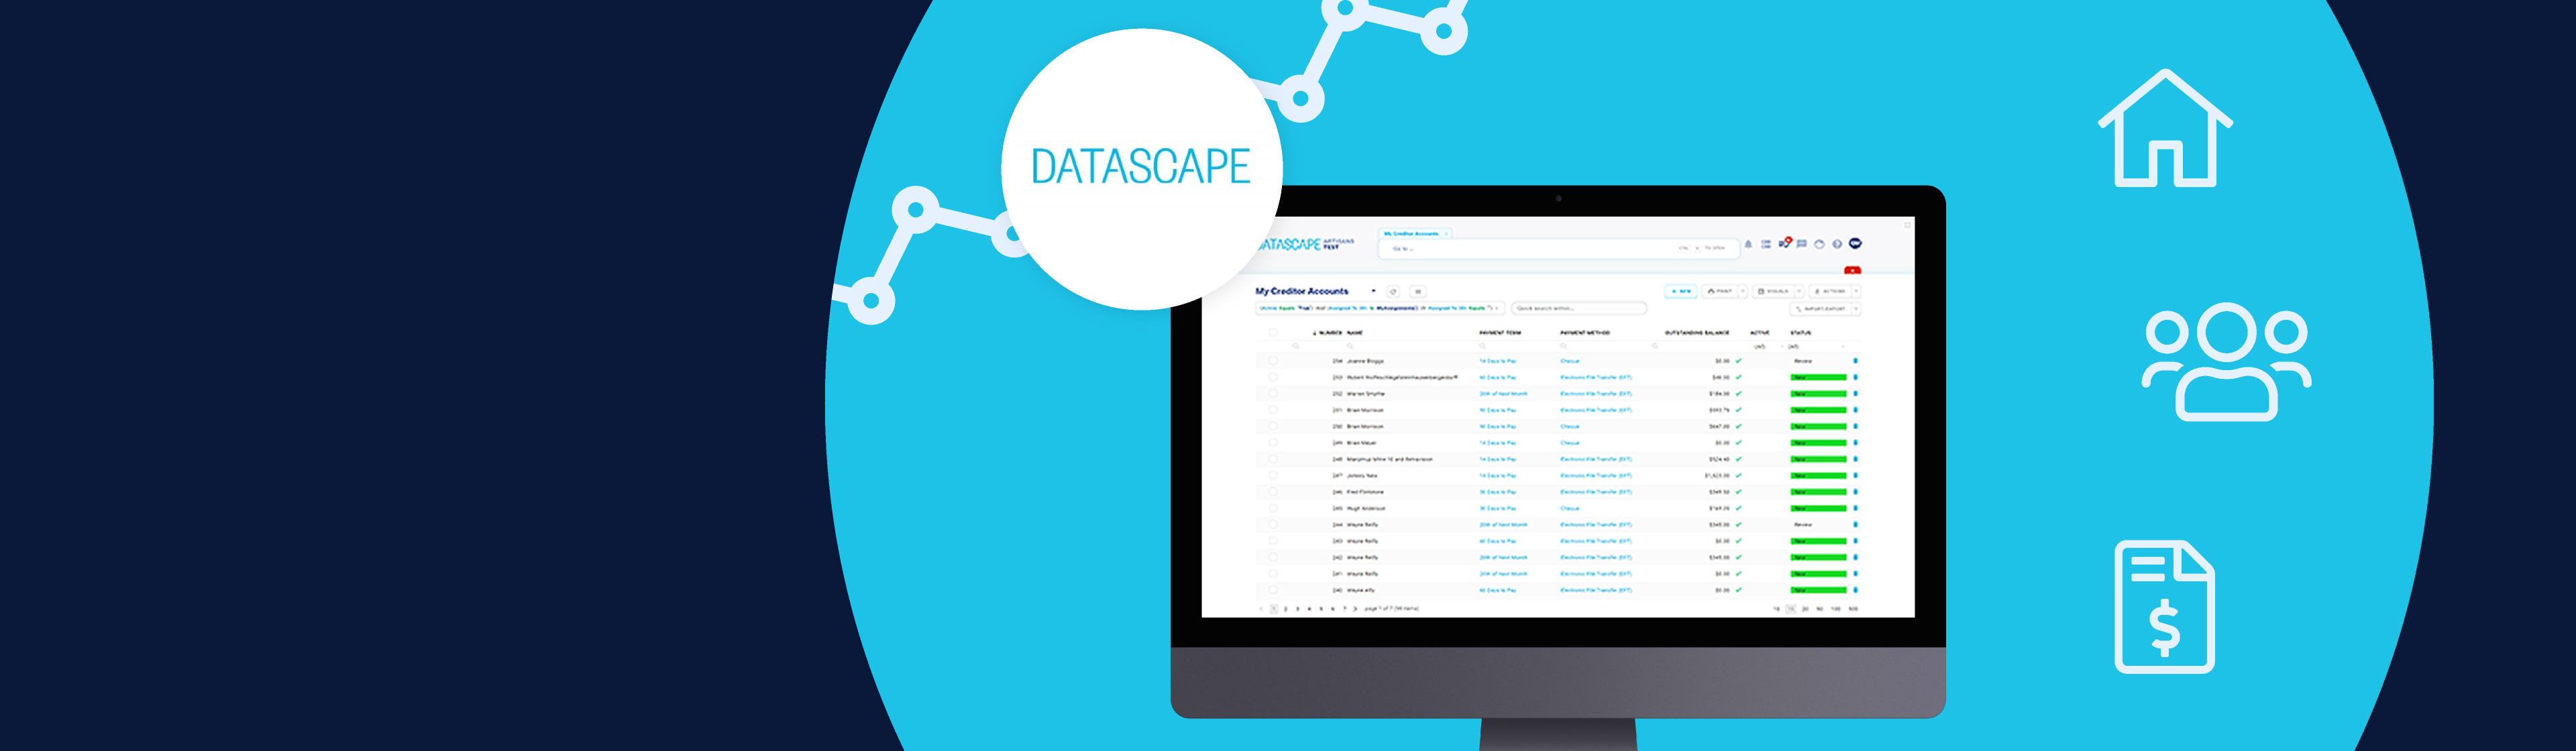 A screen mock-up of the Datascape Enterprise software